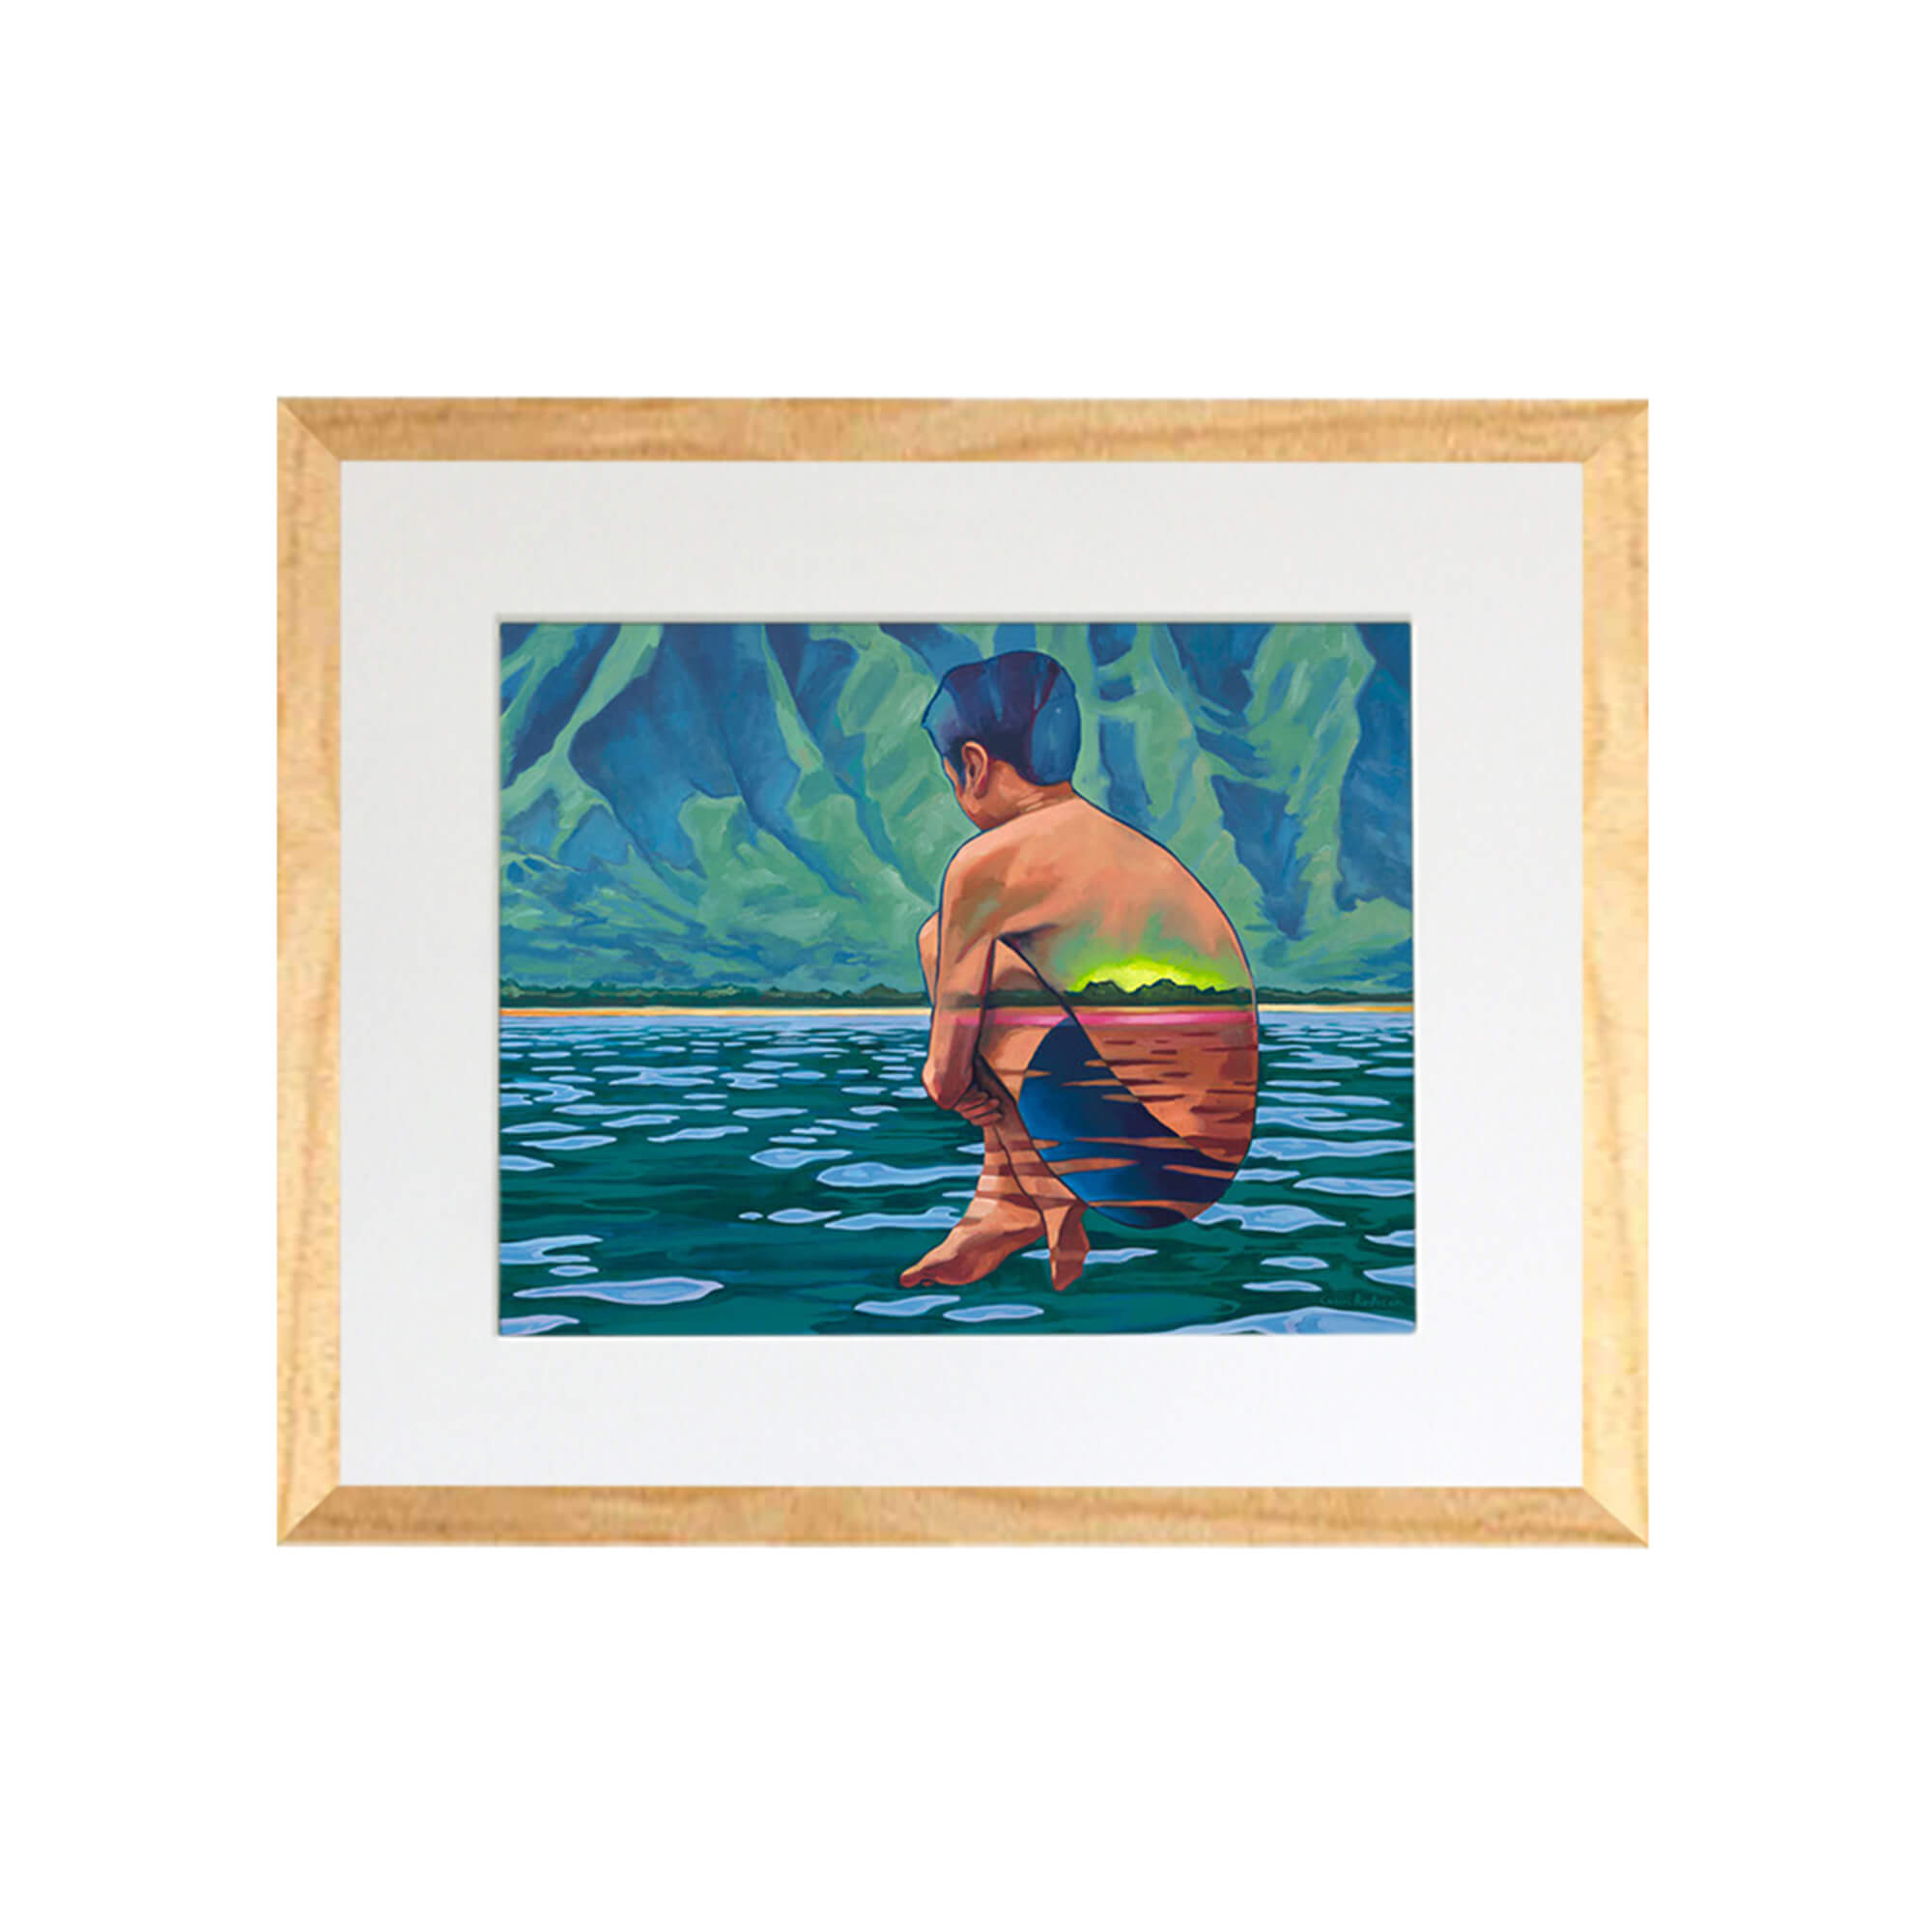 A boy jumping to the water and a tropical island background by Hawaii artist Colin Redican